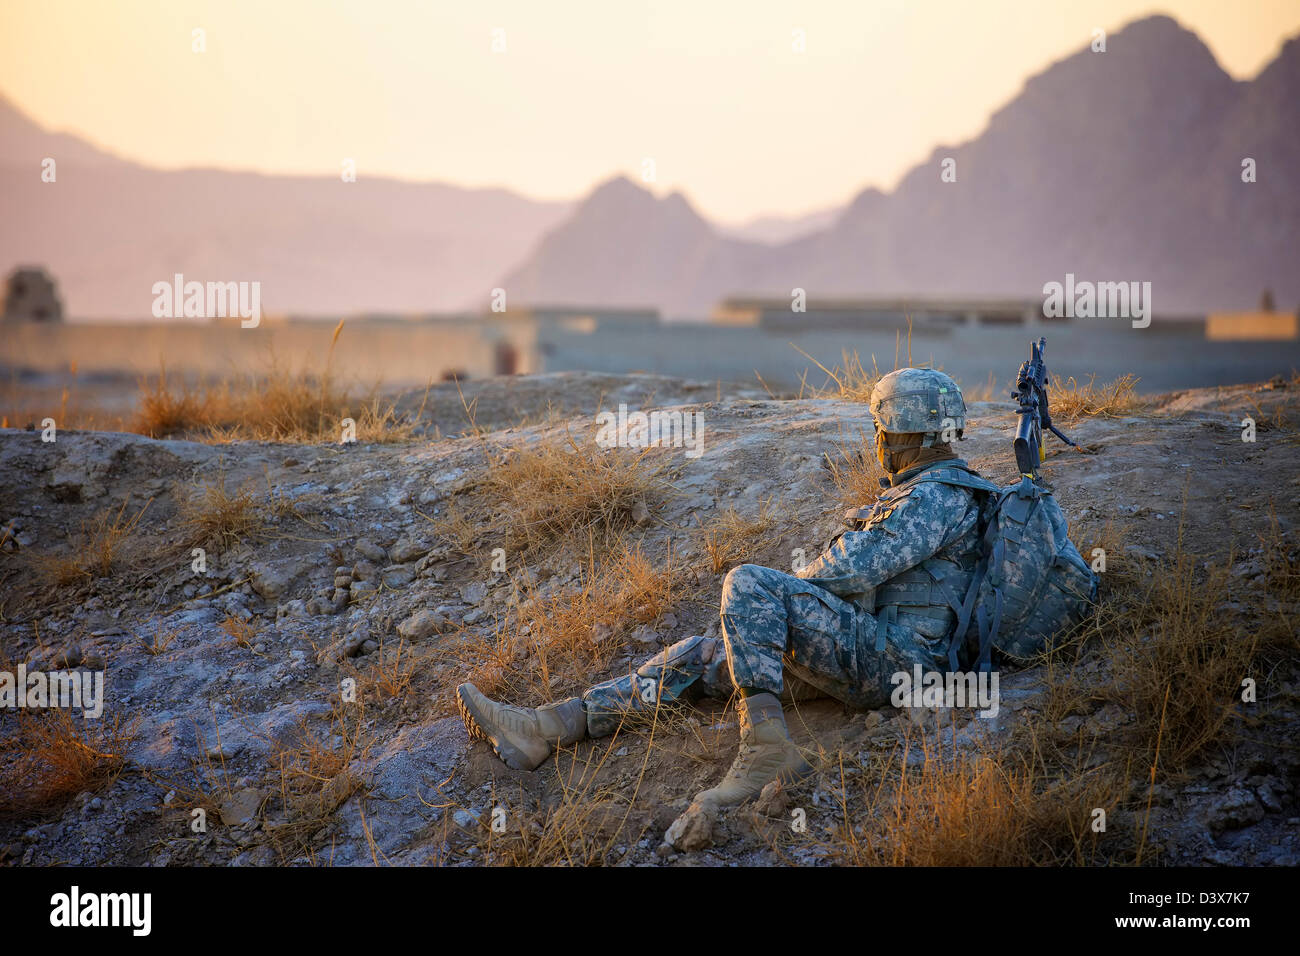 An American Soldier keeps watch during a patrol in Kandahar Province, Afghanistan. Stock Photo